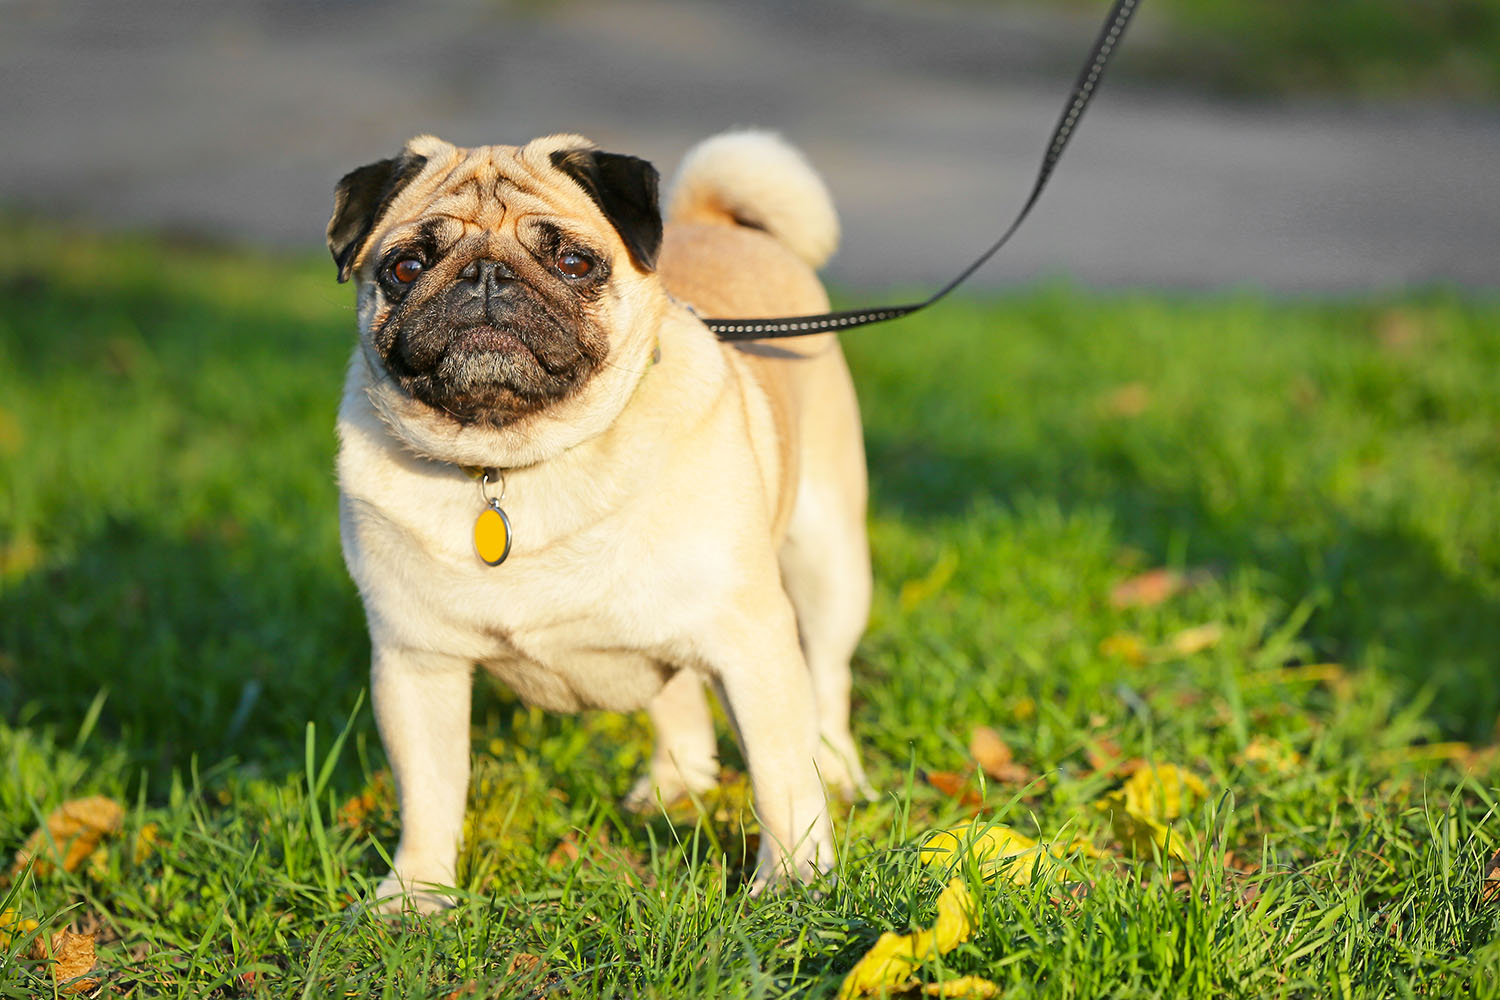 fawn pug dog on a black leash standing on some green grass